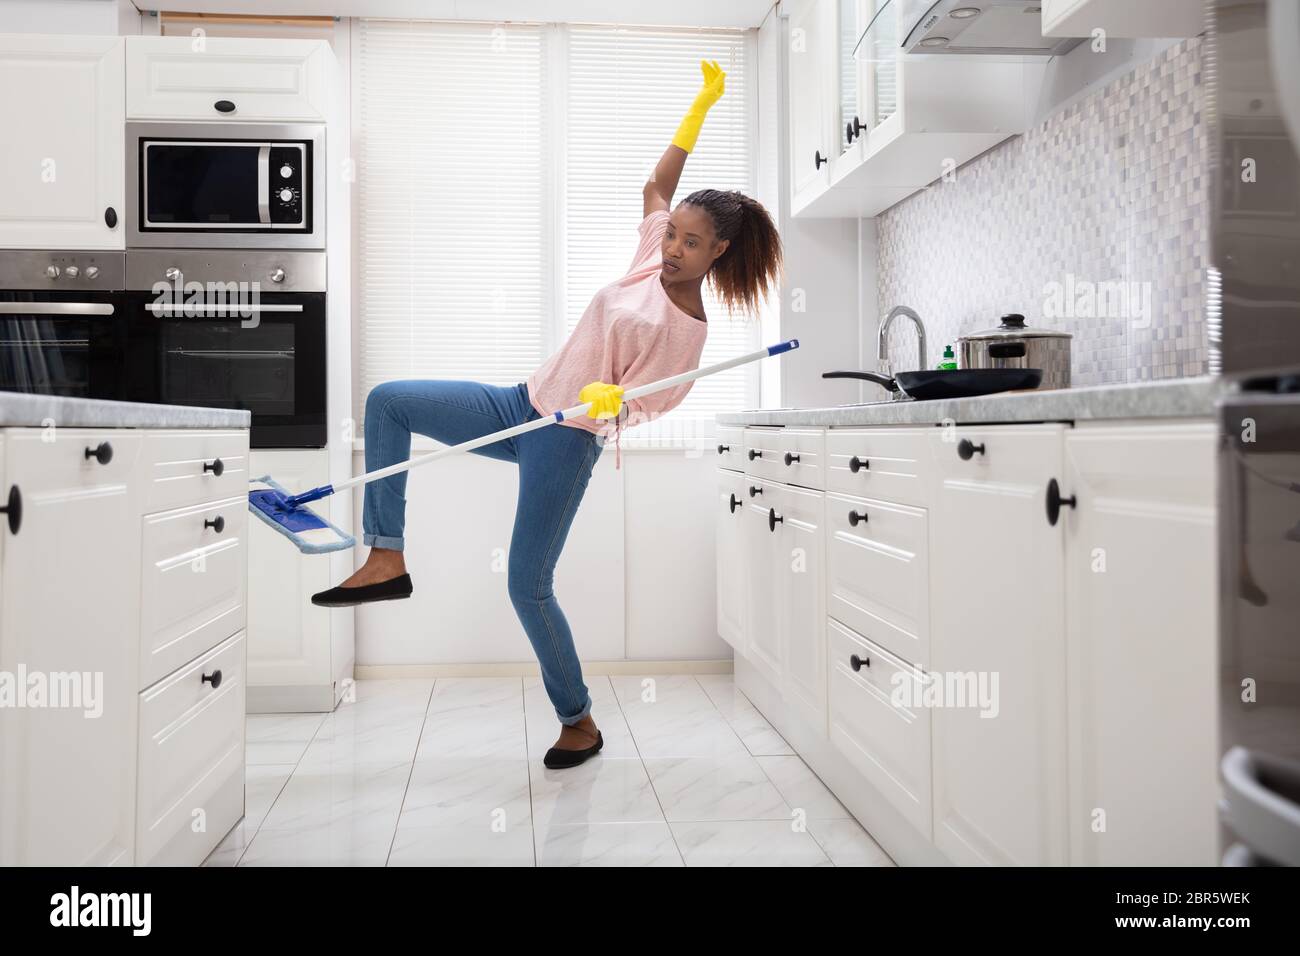 Close-up Of A Young African Woman Slipping While Mopping Floor In The Kitchen Stock Photo